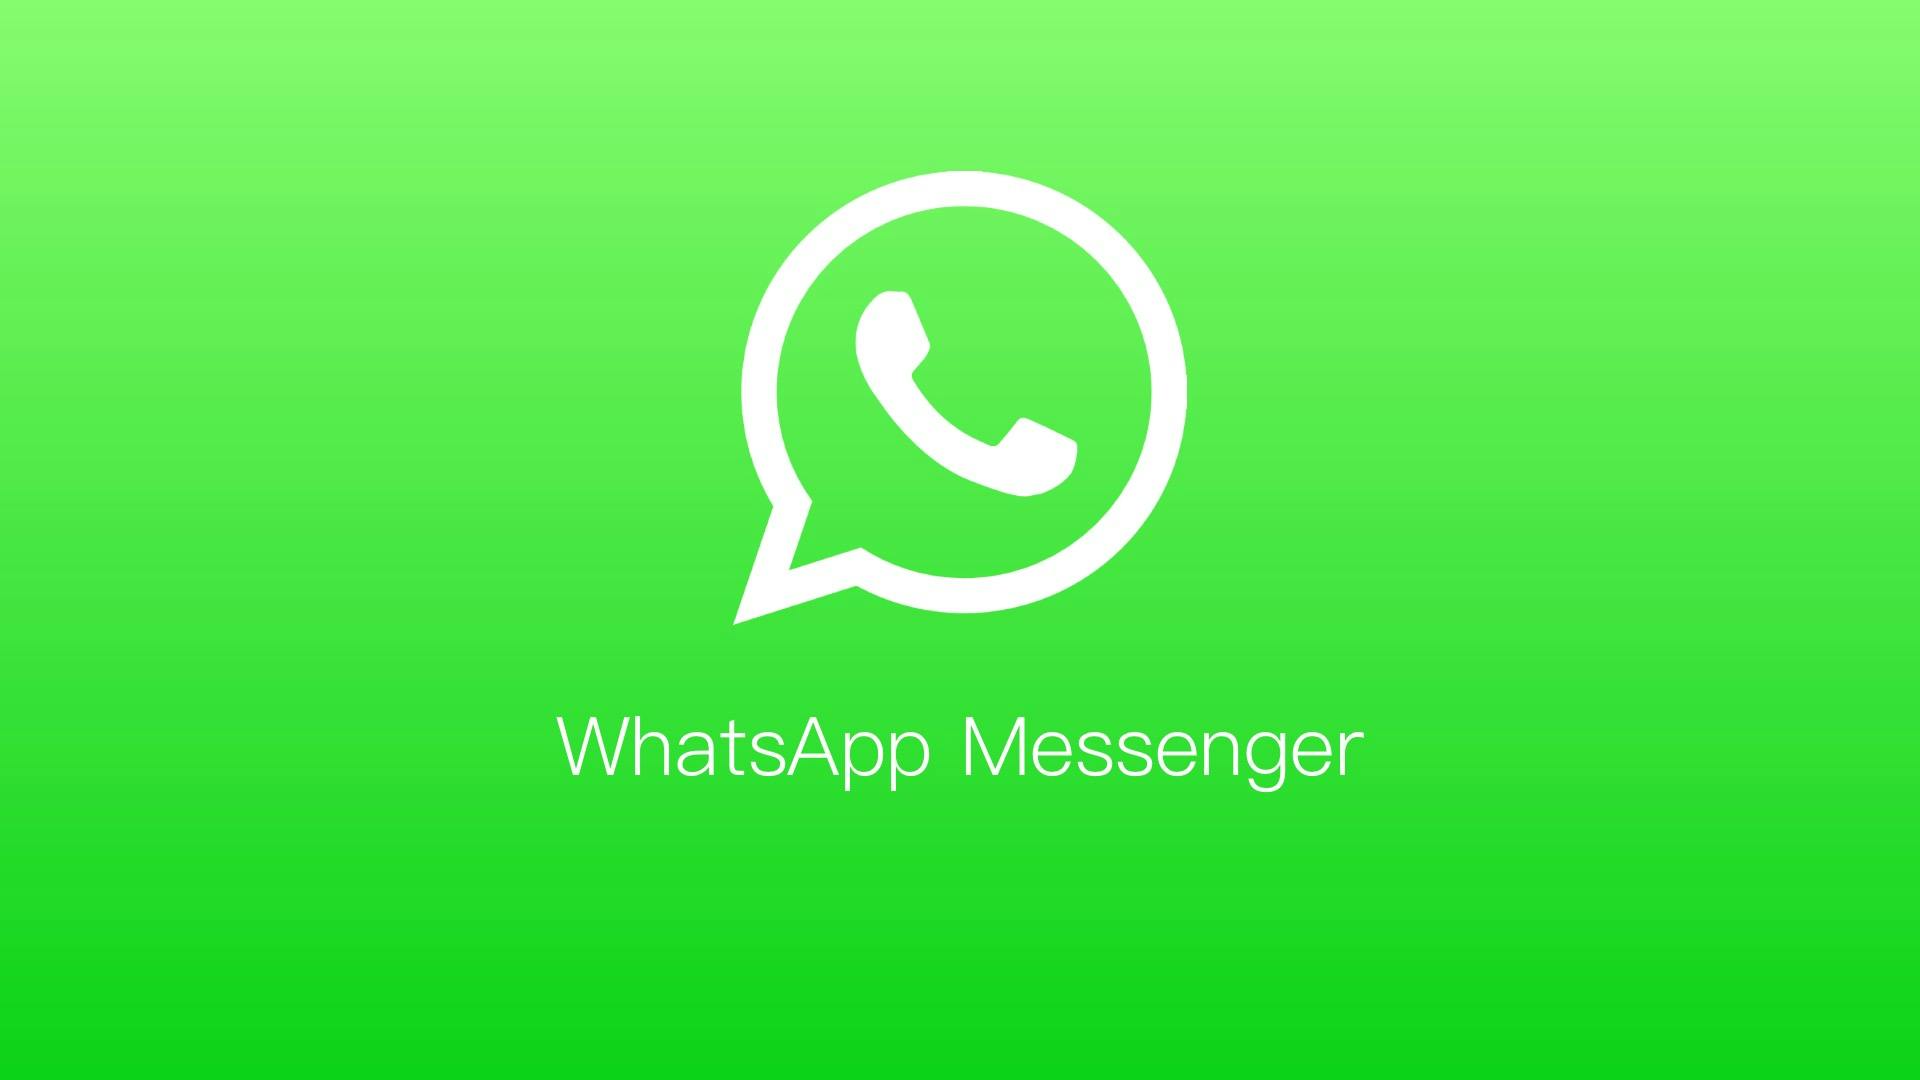 New WhatsApp messaging security feature send media messages that can be viewed only once